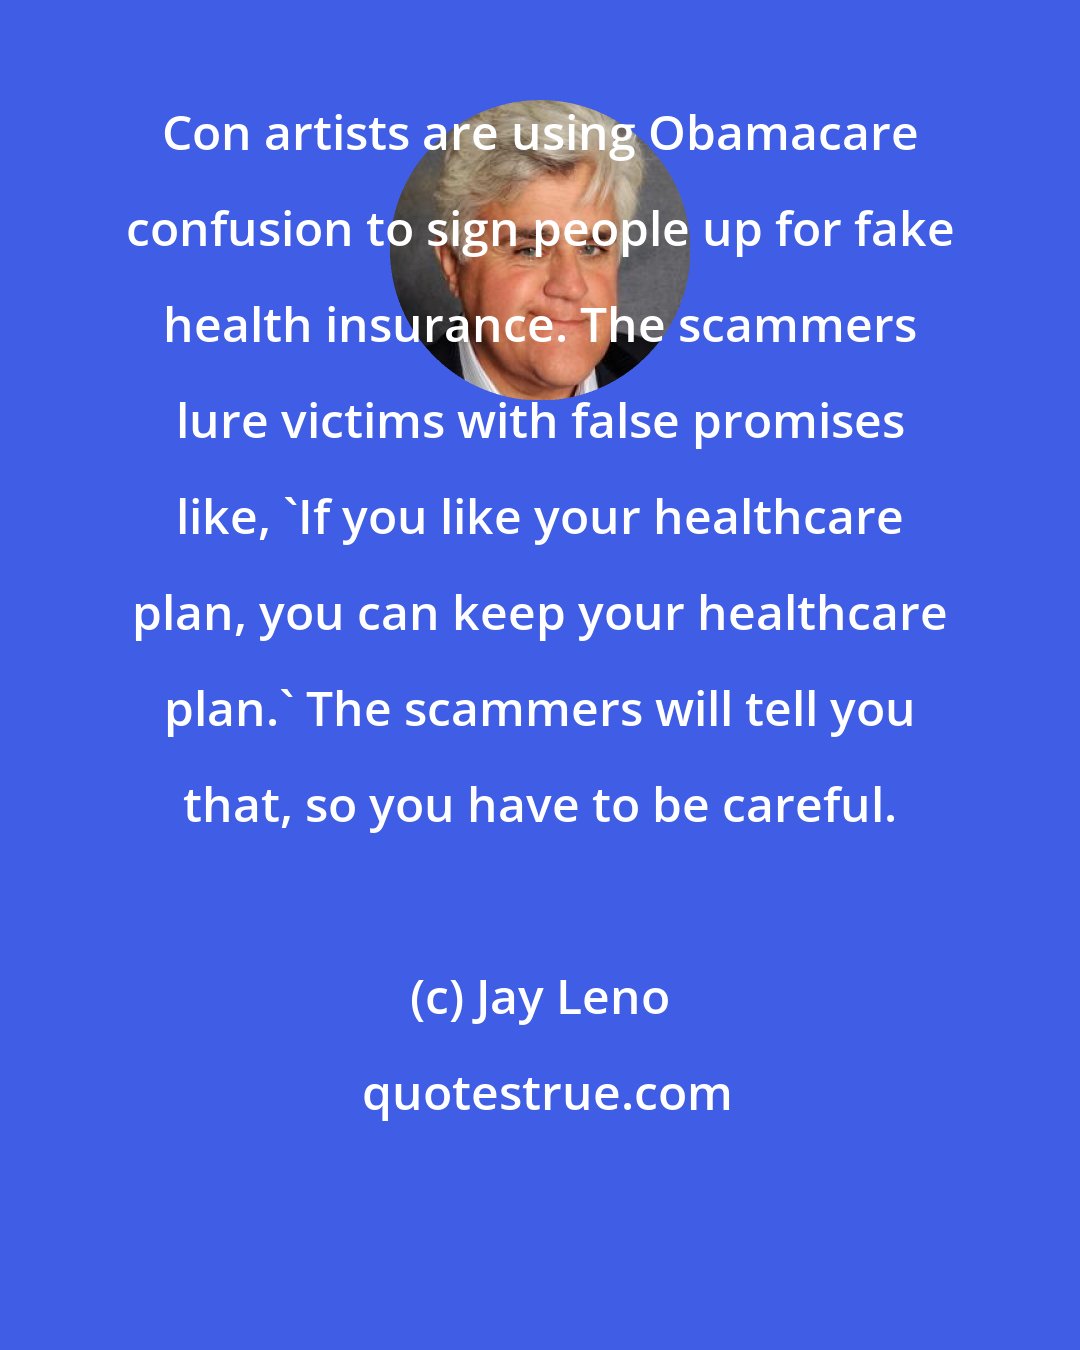 Jay Leno: Con artists are using Obamacare confusion to sign people up for fake health insurance. The scammers lure victims with false promises like, 'If you like your healthcare plan, you can keep your healthcare plan.' The scammers will tell you that, so you have to be careful.